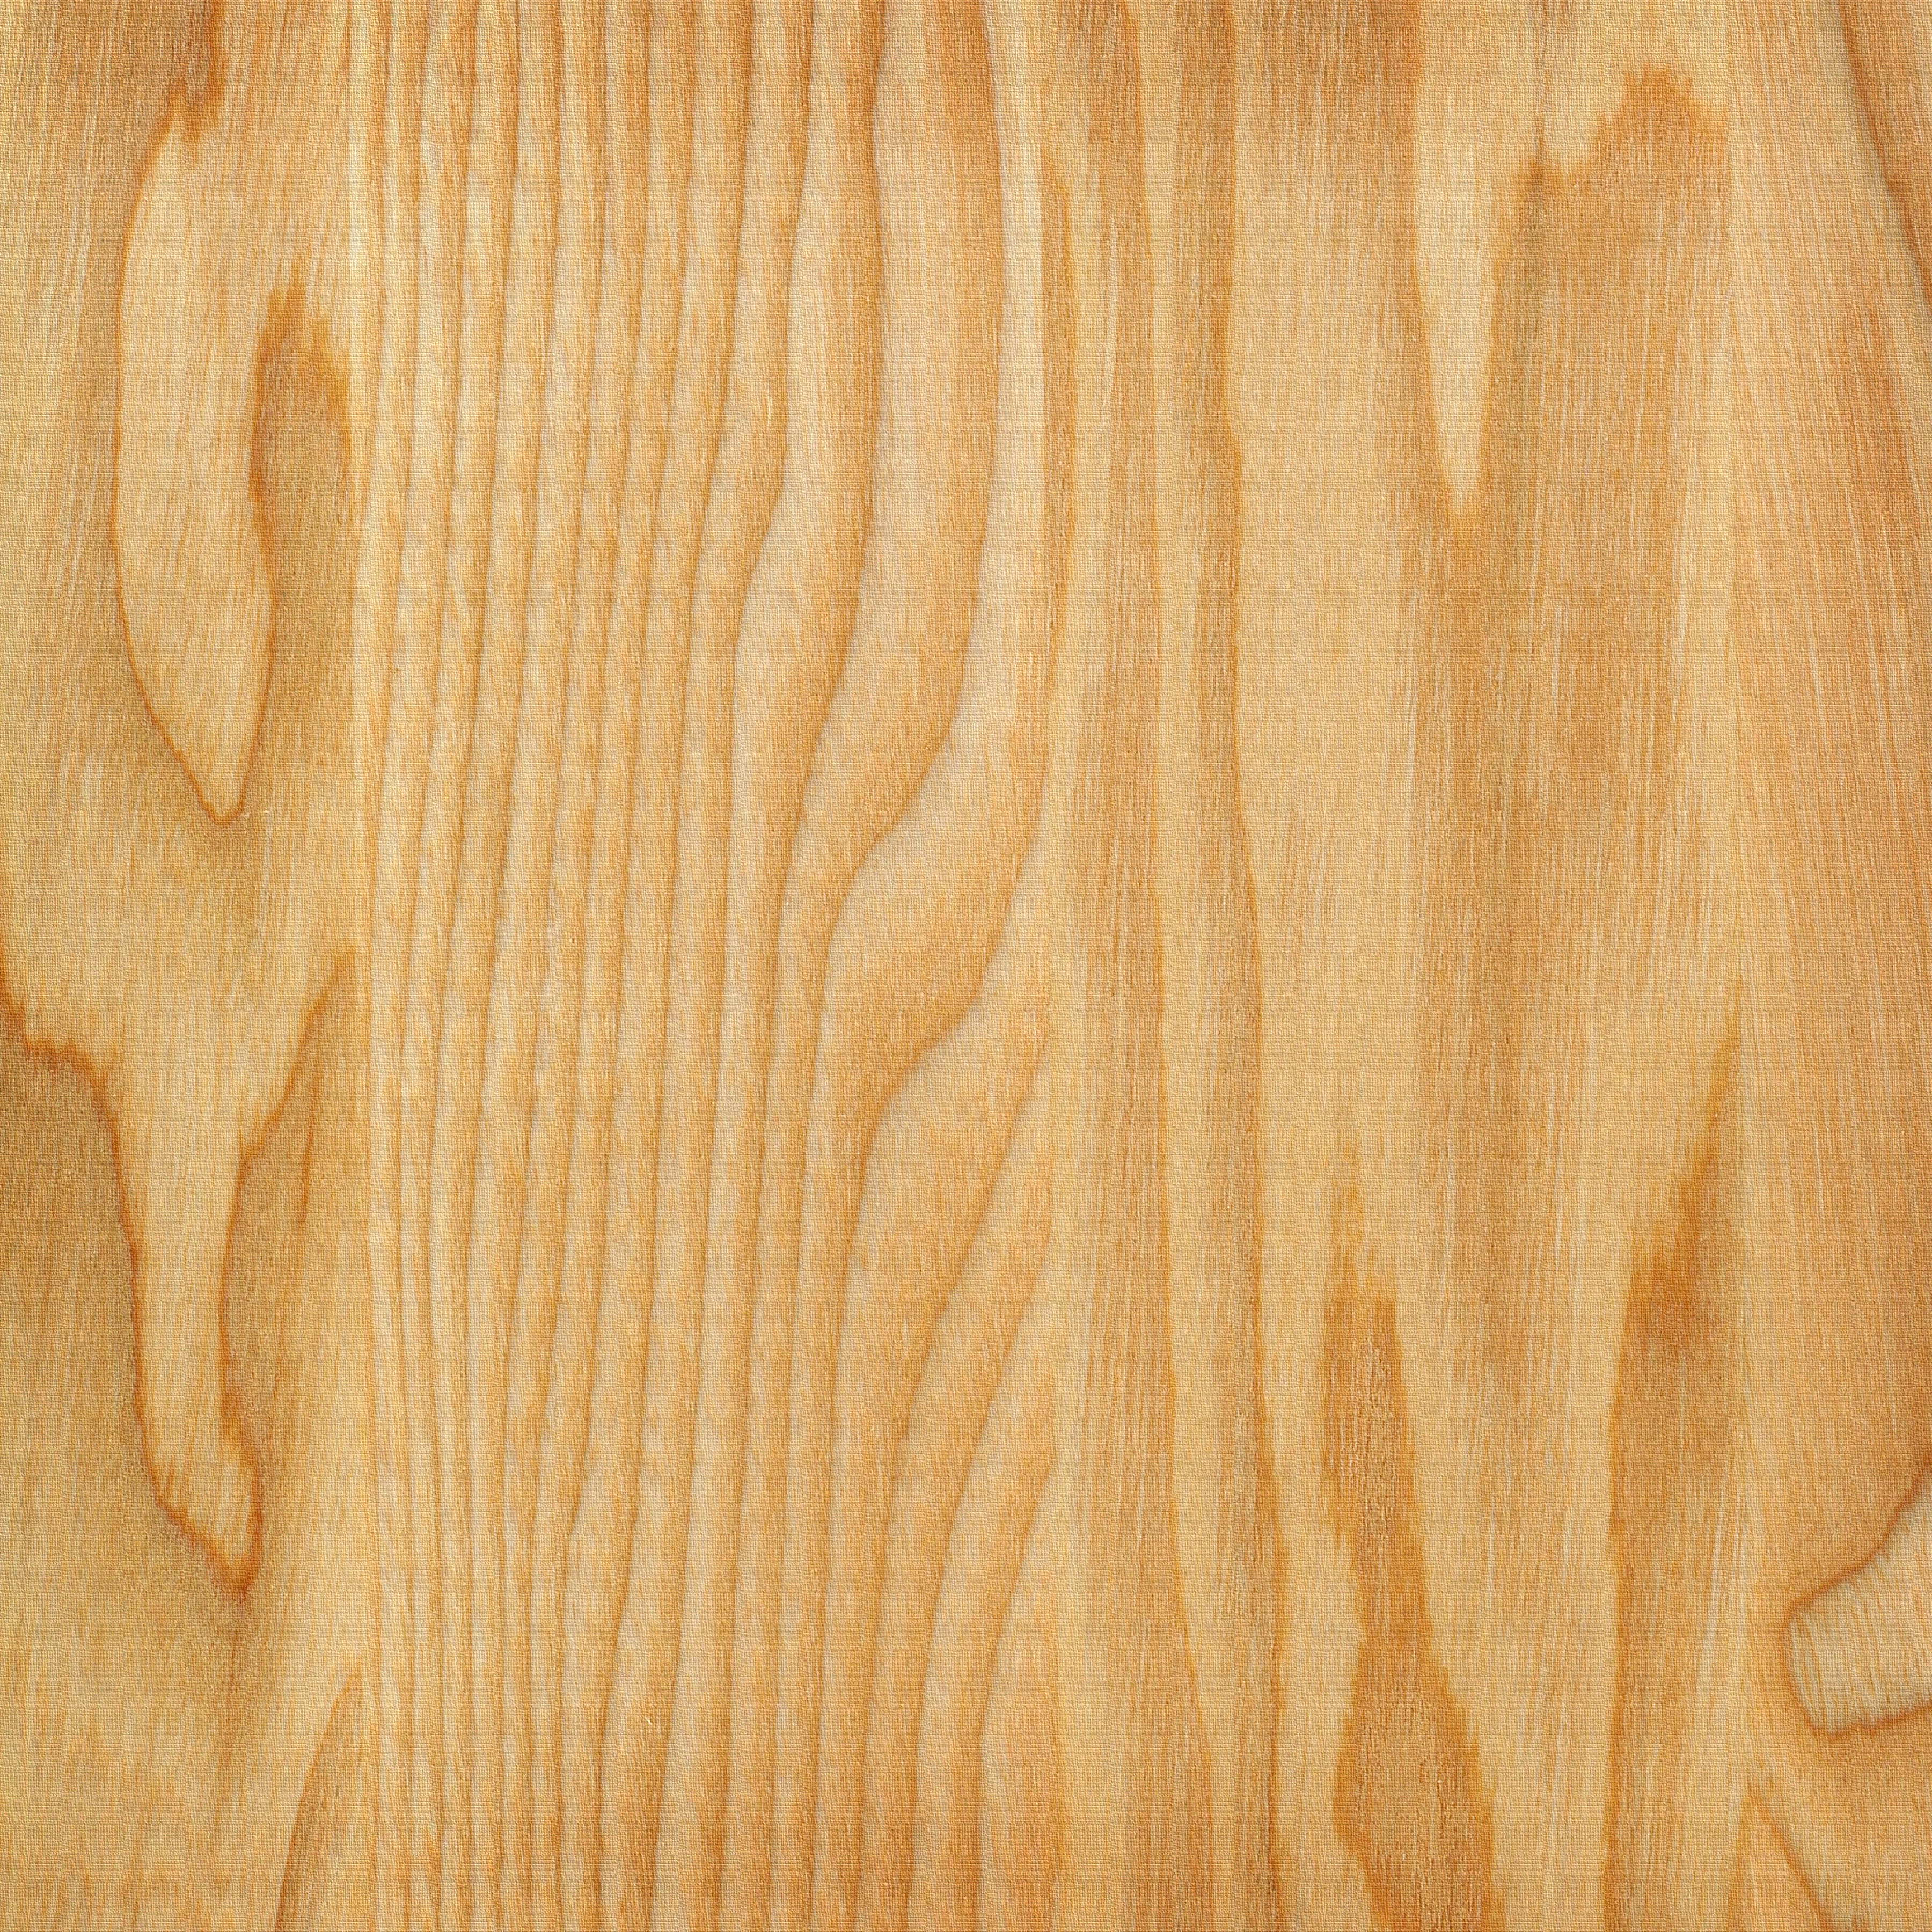 Wooden Background Thirty-eight | Photo Texture & Background